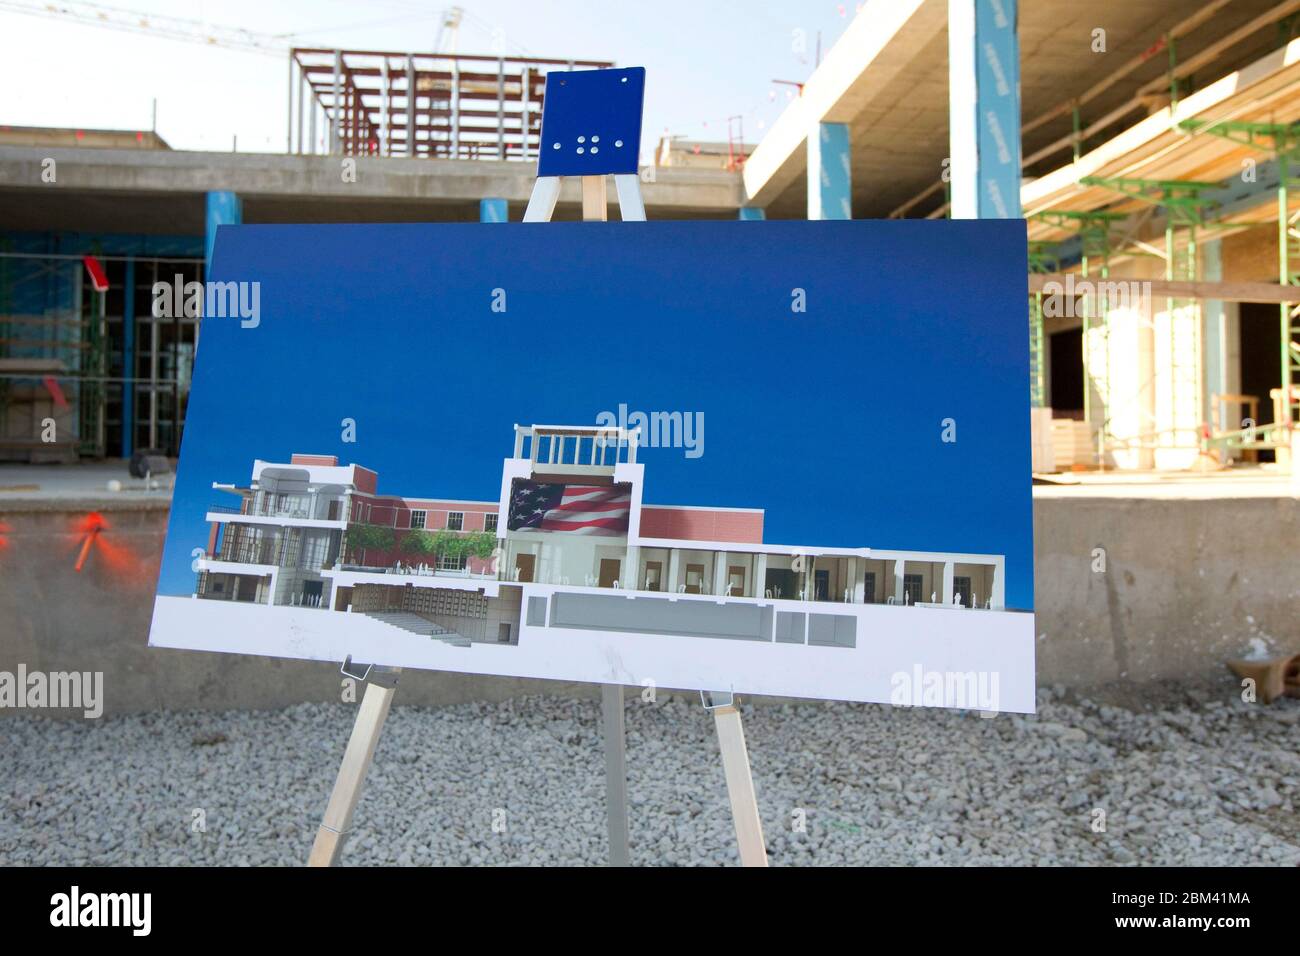 Dallas, Texas USA, October 3, 2011: A rendering of the facade of the George W. Bush Presidential Center on the campus of Southern Methodist University on display in front of the main plaza prior to a media construction tour of the site. When the center is completed in the spring of 2013, it will comprise of a 226,000-square-foot building with offices, presidential archives, research, restaurants and classroom space over the 25-acre site. ©Bob Daemmrich Stock Photo